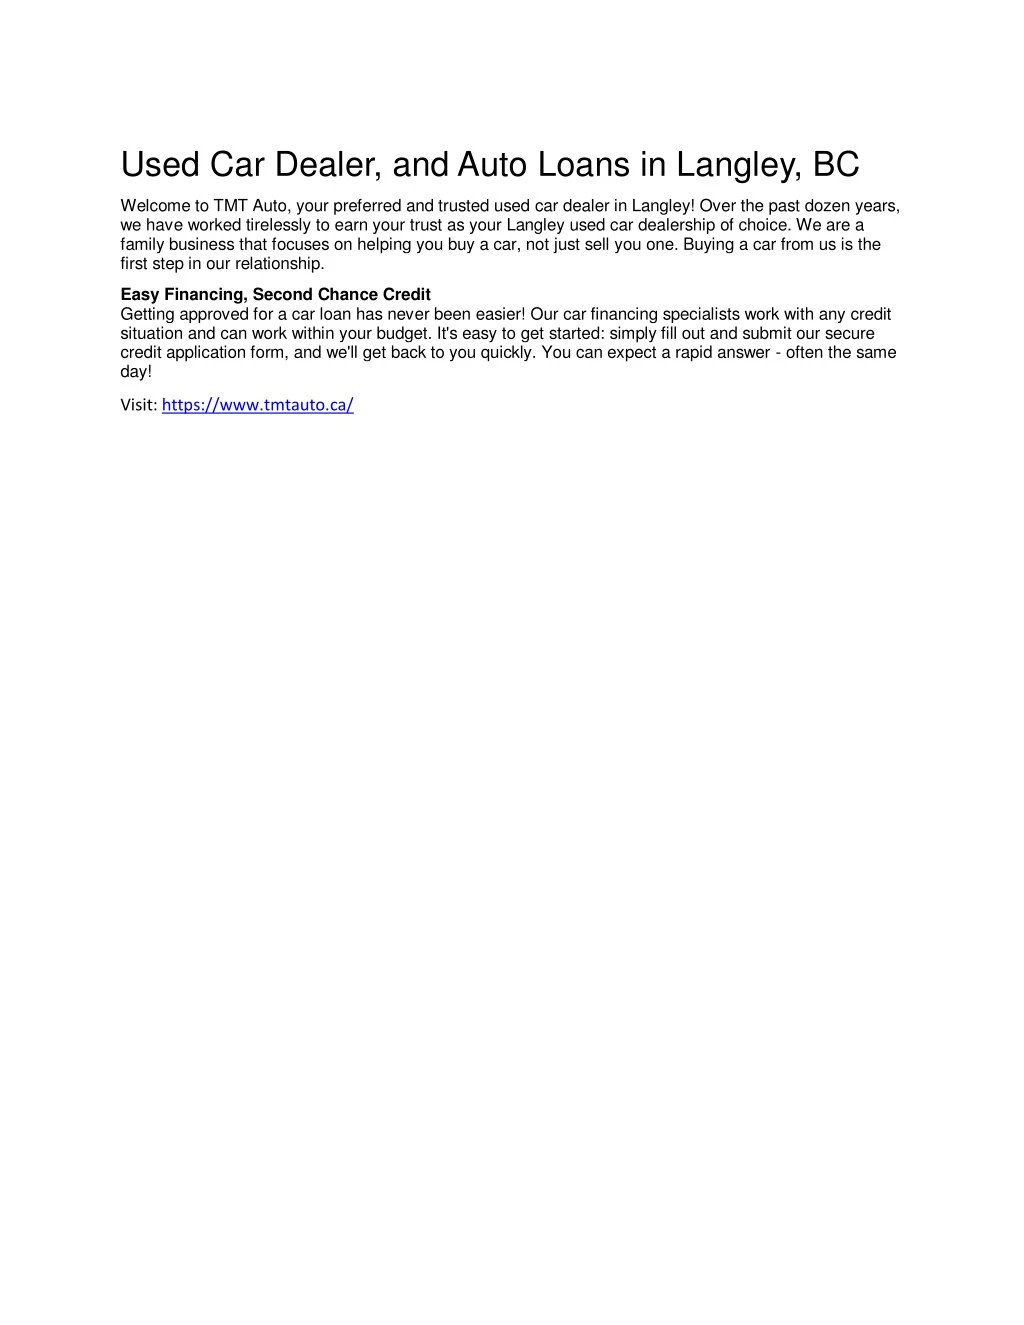 used car dealer and auto loans in langley bc n.